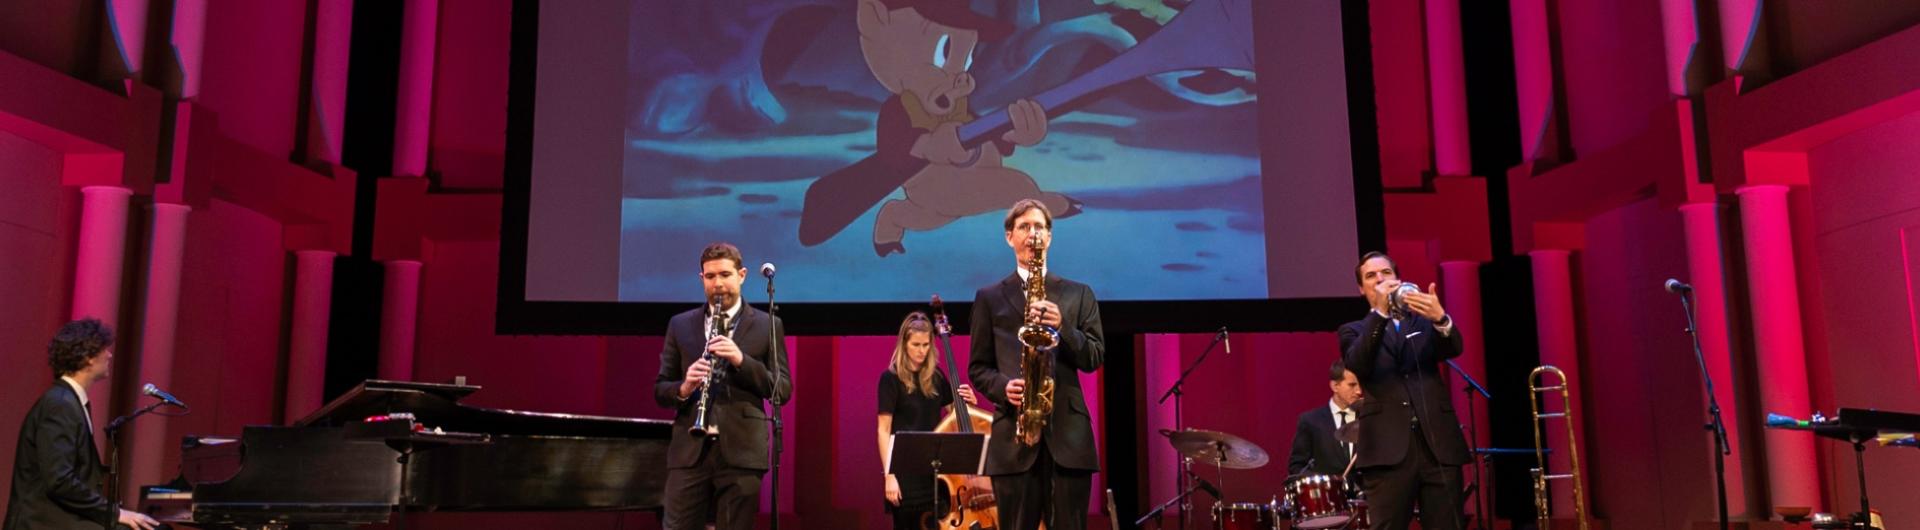 Members of the band performing on stage while a classic cartoon plays on a screen behind them.